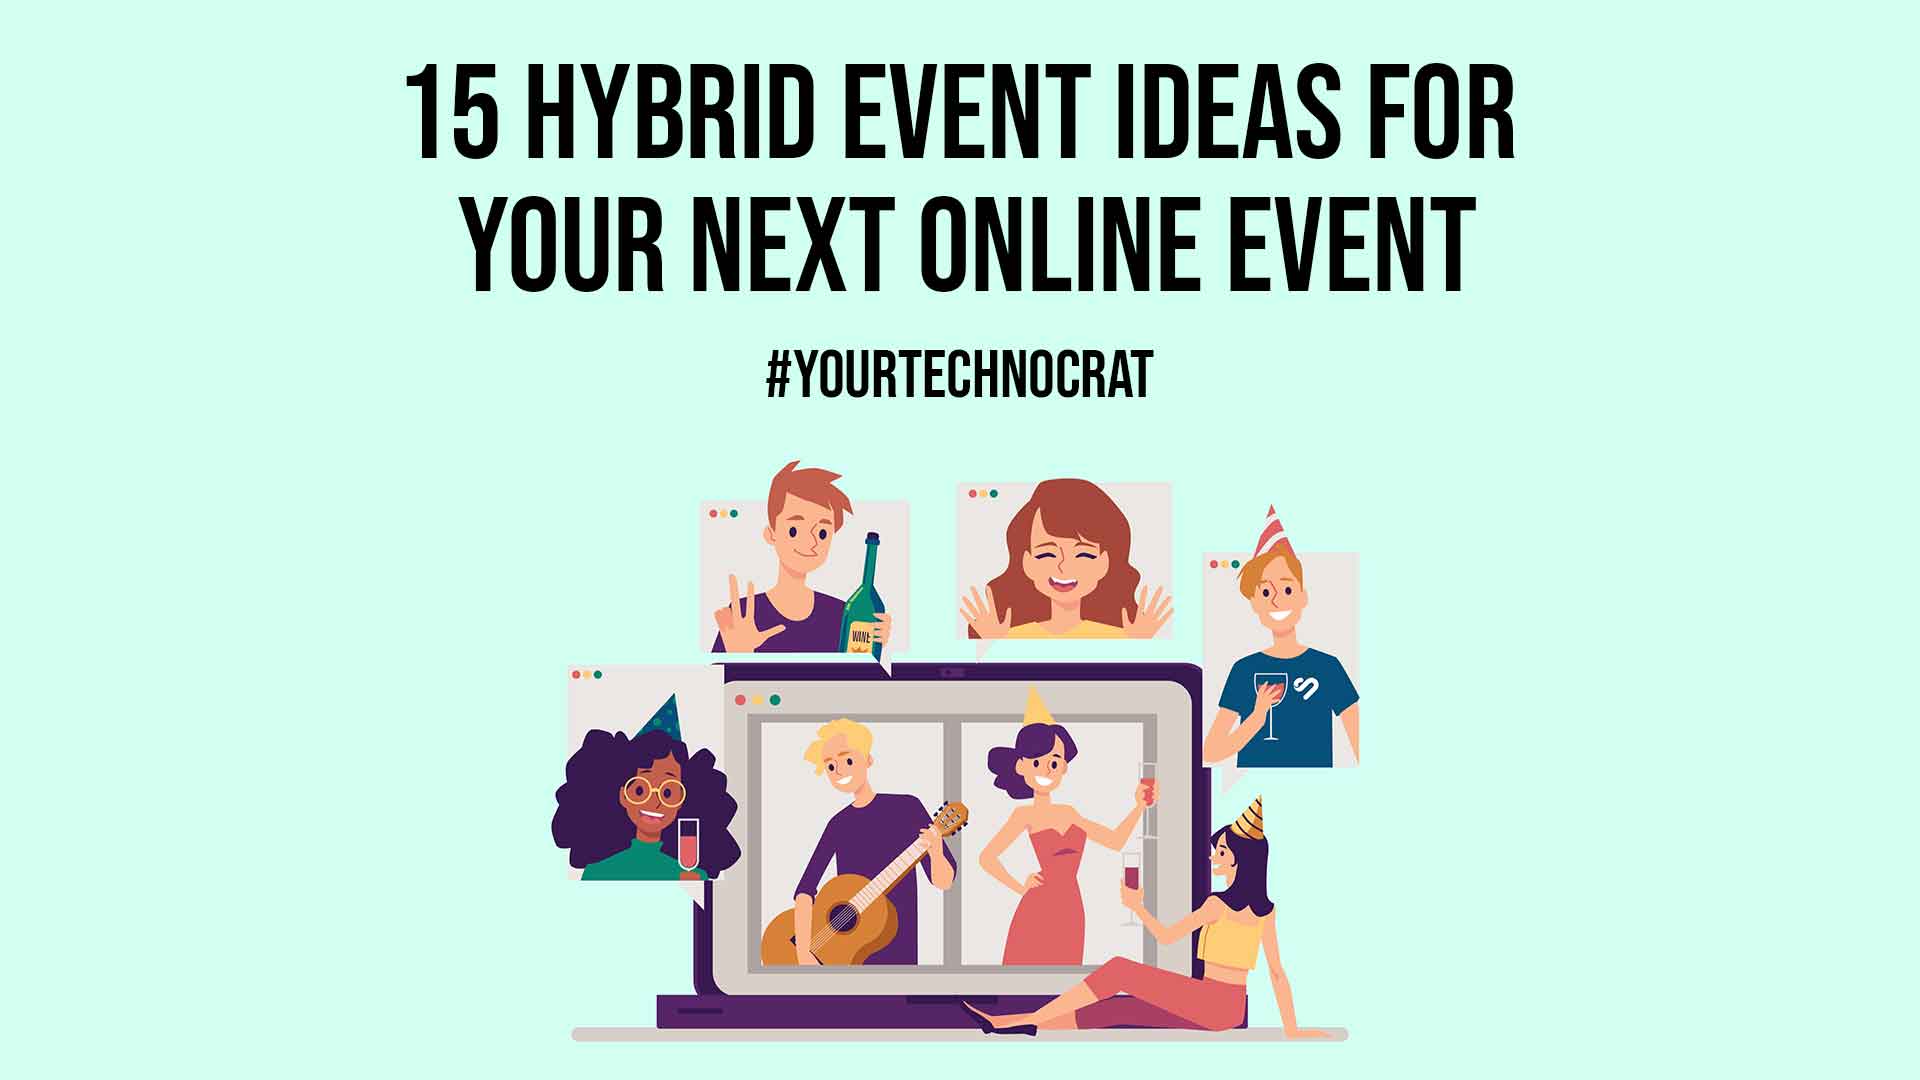 15 Hybrid Event Ideas for Your Next Online Event